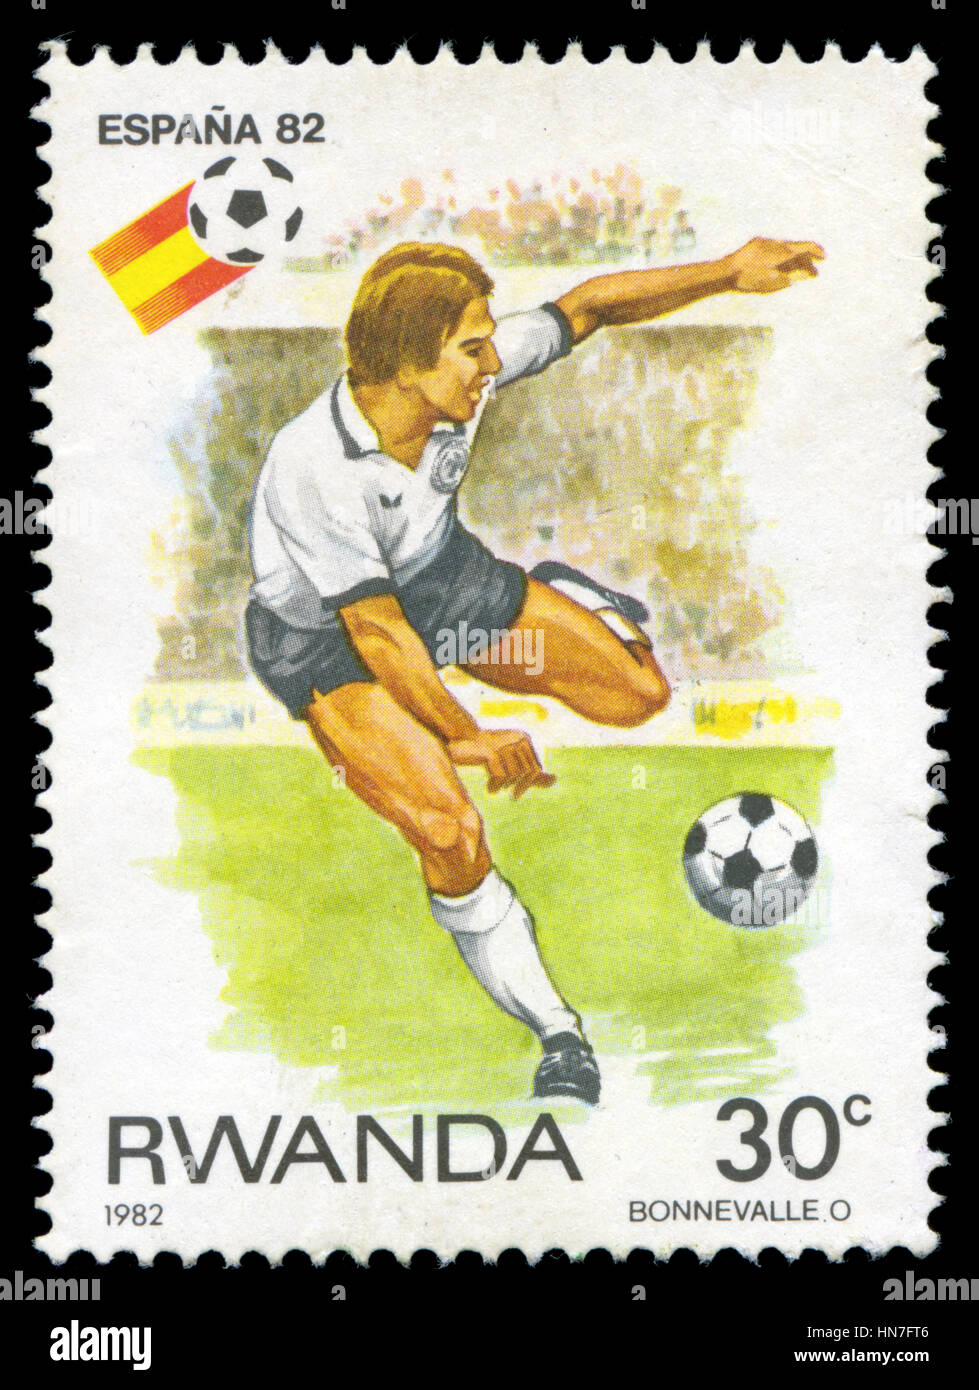 Postmarked stamp from Rwanda in the Football World Cup 1982, Spain series issued in 1982 Stock Photo